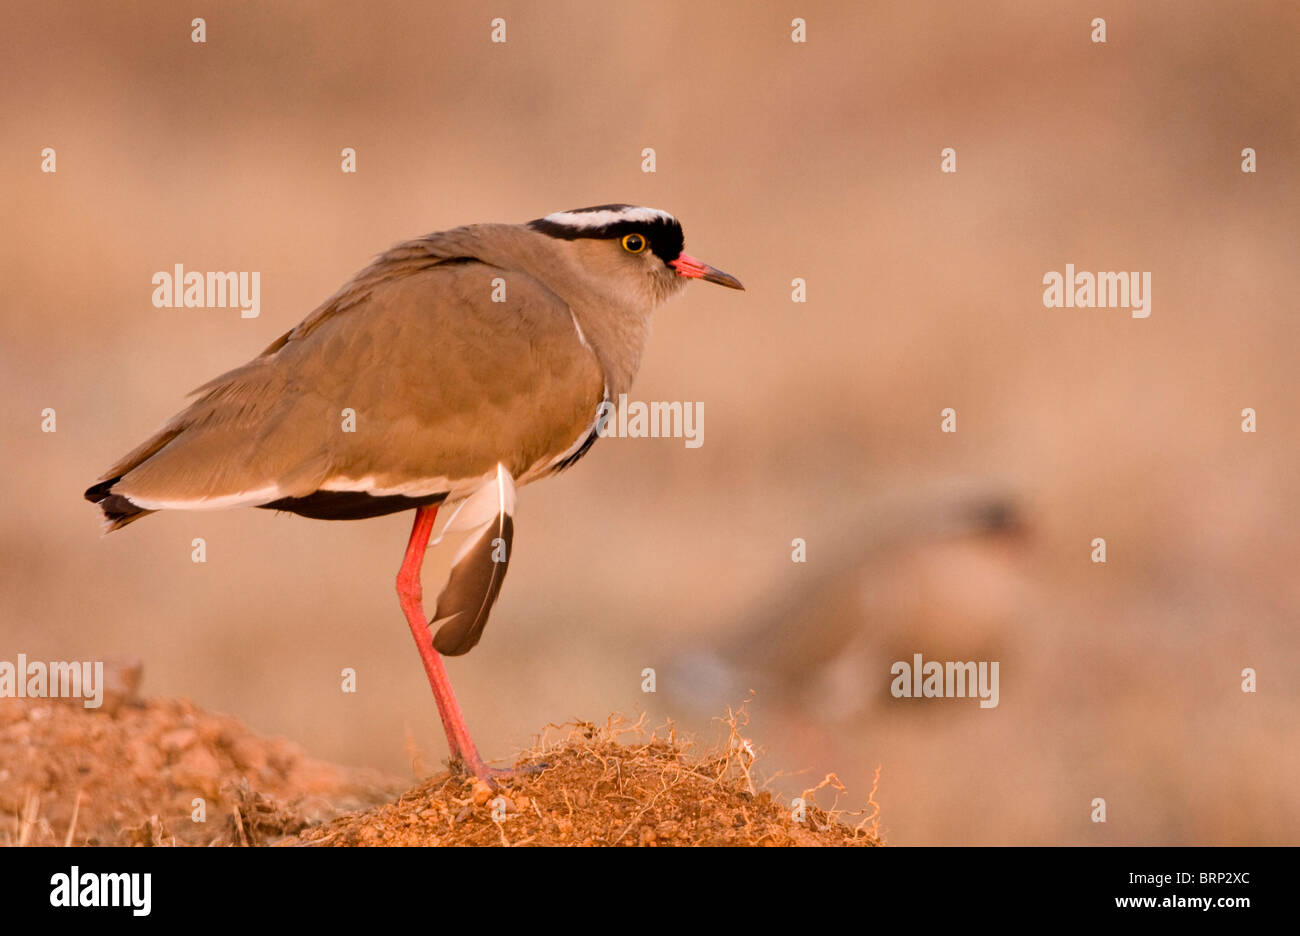 Crowned lapwing standing on one leg in warm light Stock Photo